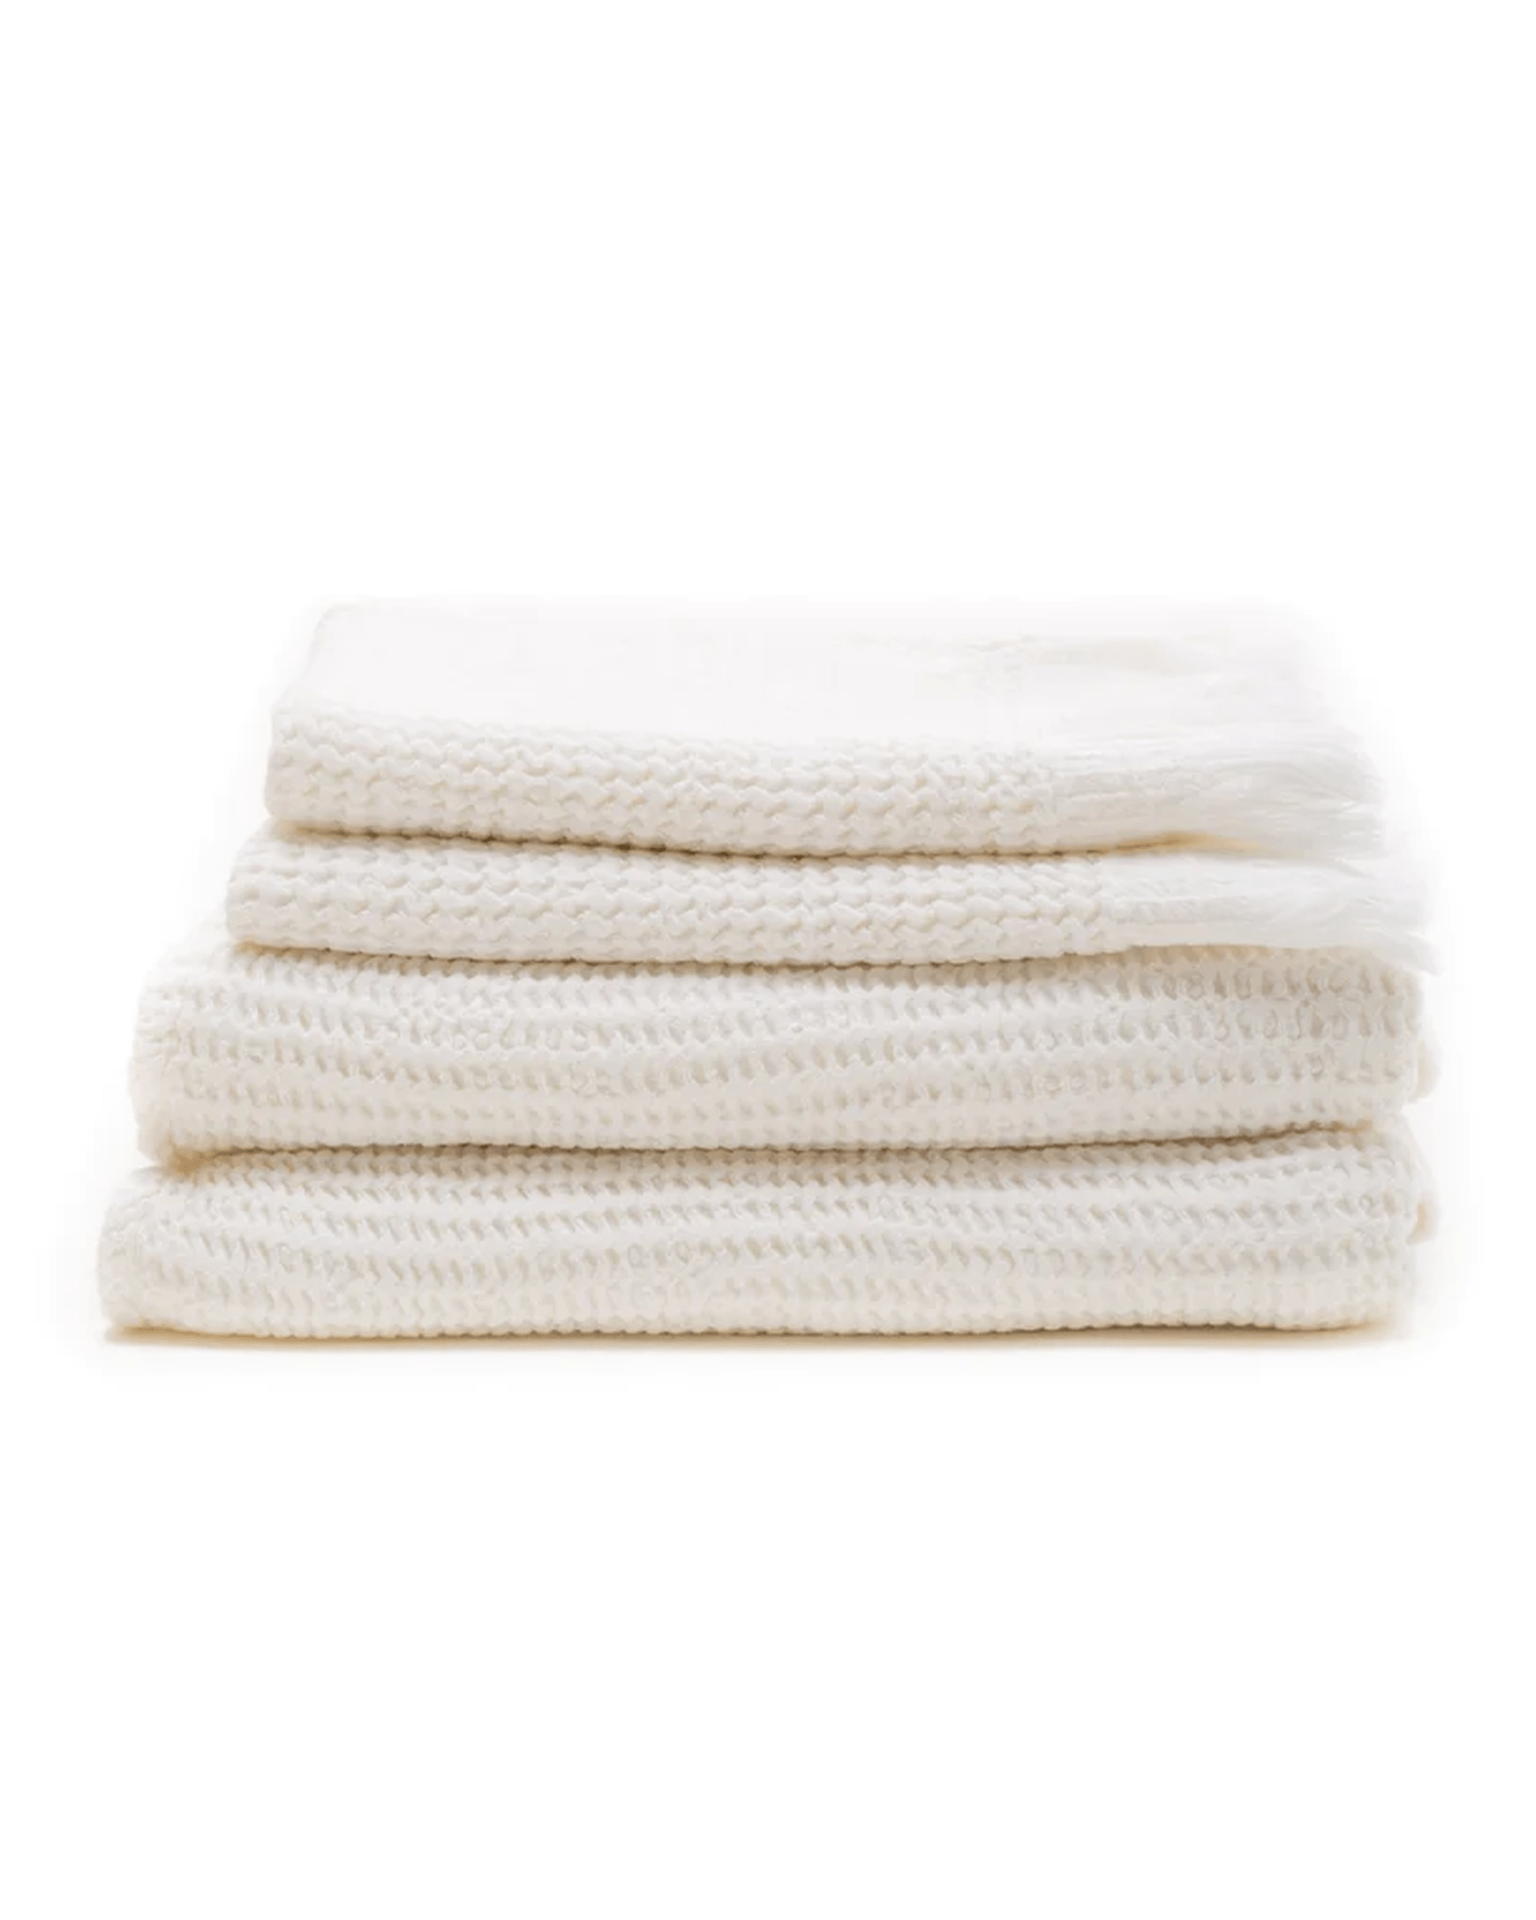 https://cdn.shopify.com/s/files/1/0003/5871/1337/files/bliss-bouqitues-house-no-23-ella-waffle-towel-in-white-white-32387836837985_2000x.png?v=1684820406